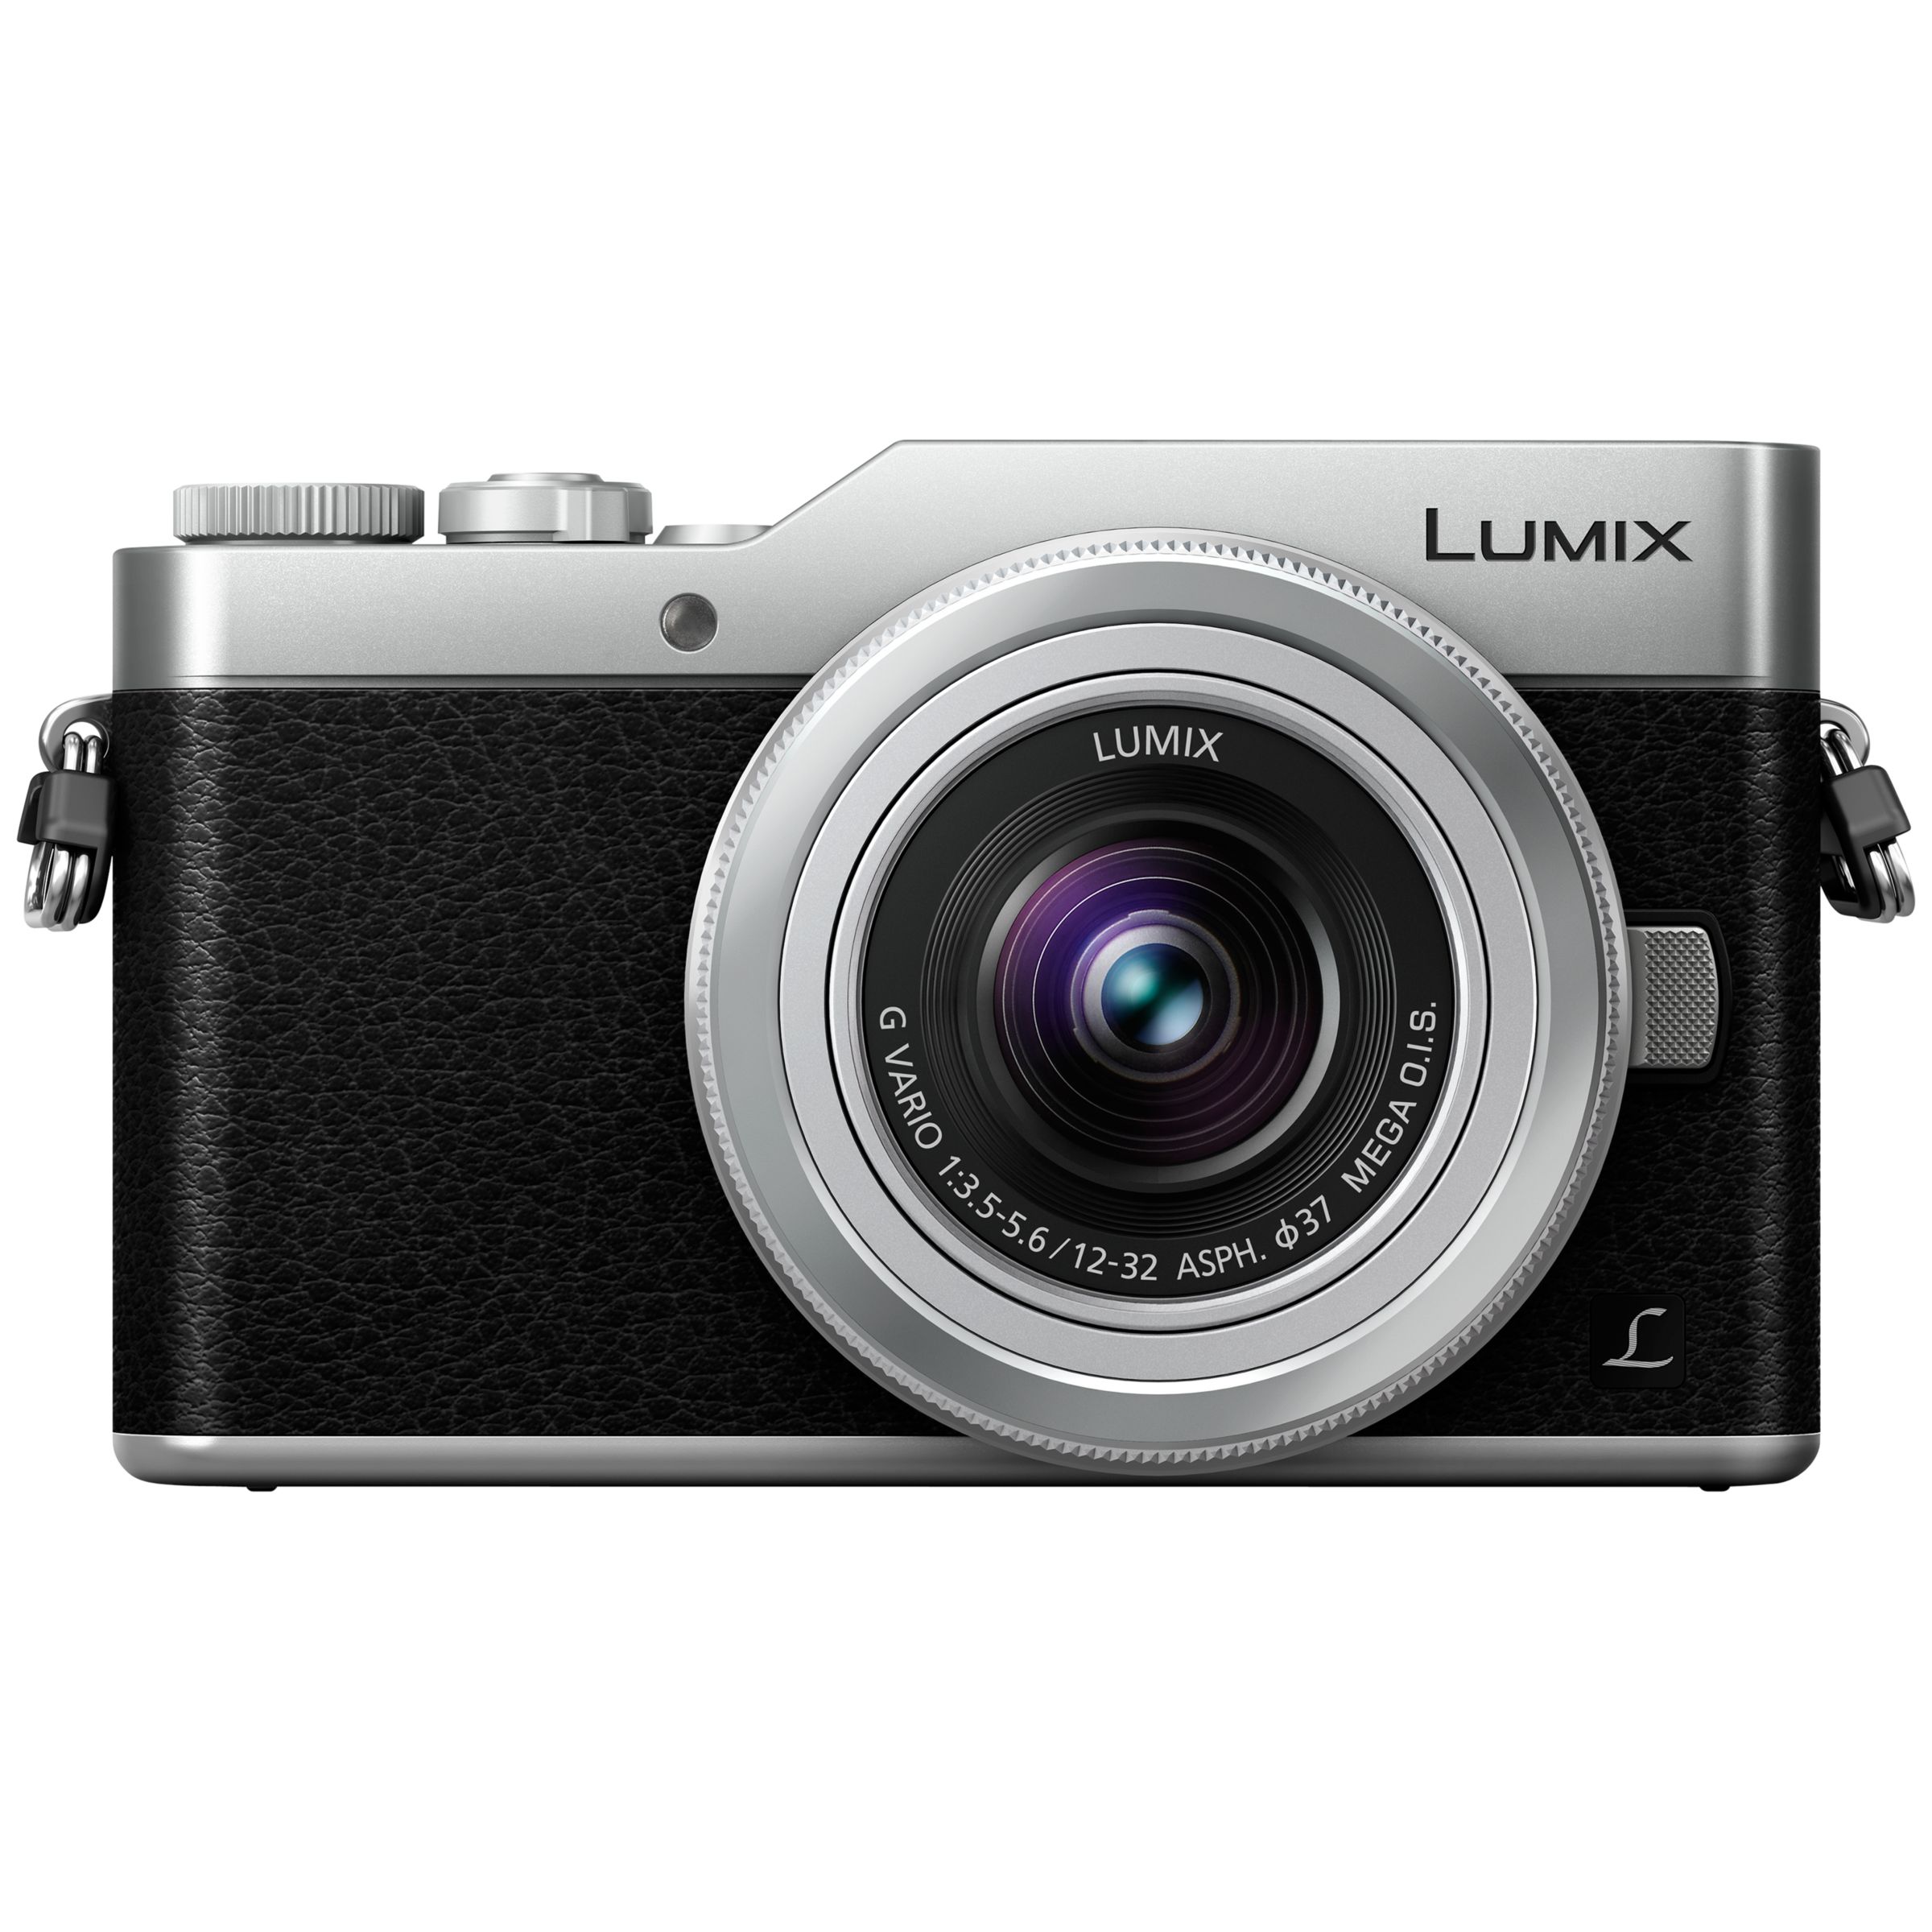 Panasonic Lumix DC-GX800 Compact System Camera with 12-32mm Interchangeable Lens, 4K Ultra HD, 16MP, 4x Digital Zoom, Wi-Fi, 3 Tiltable LCD Touch Screen